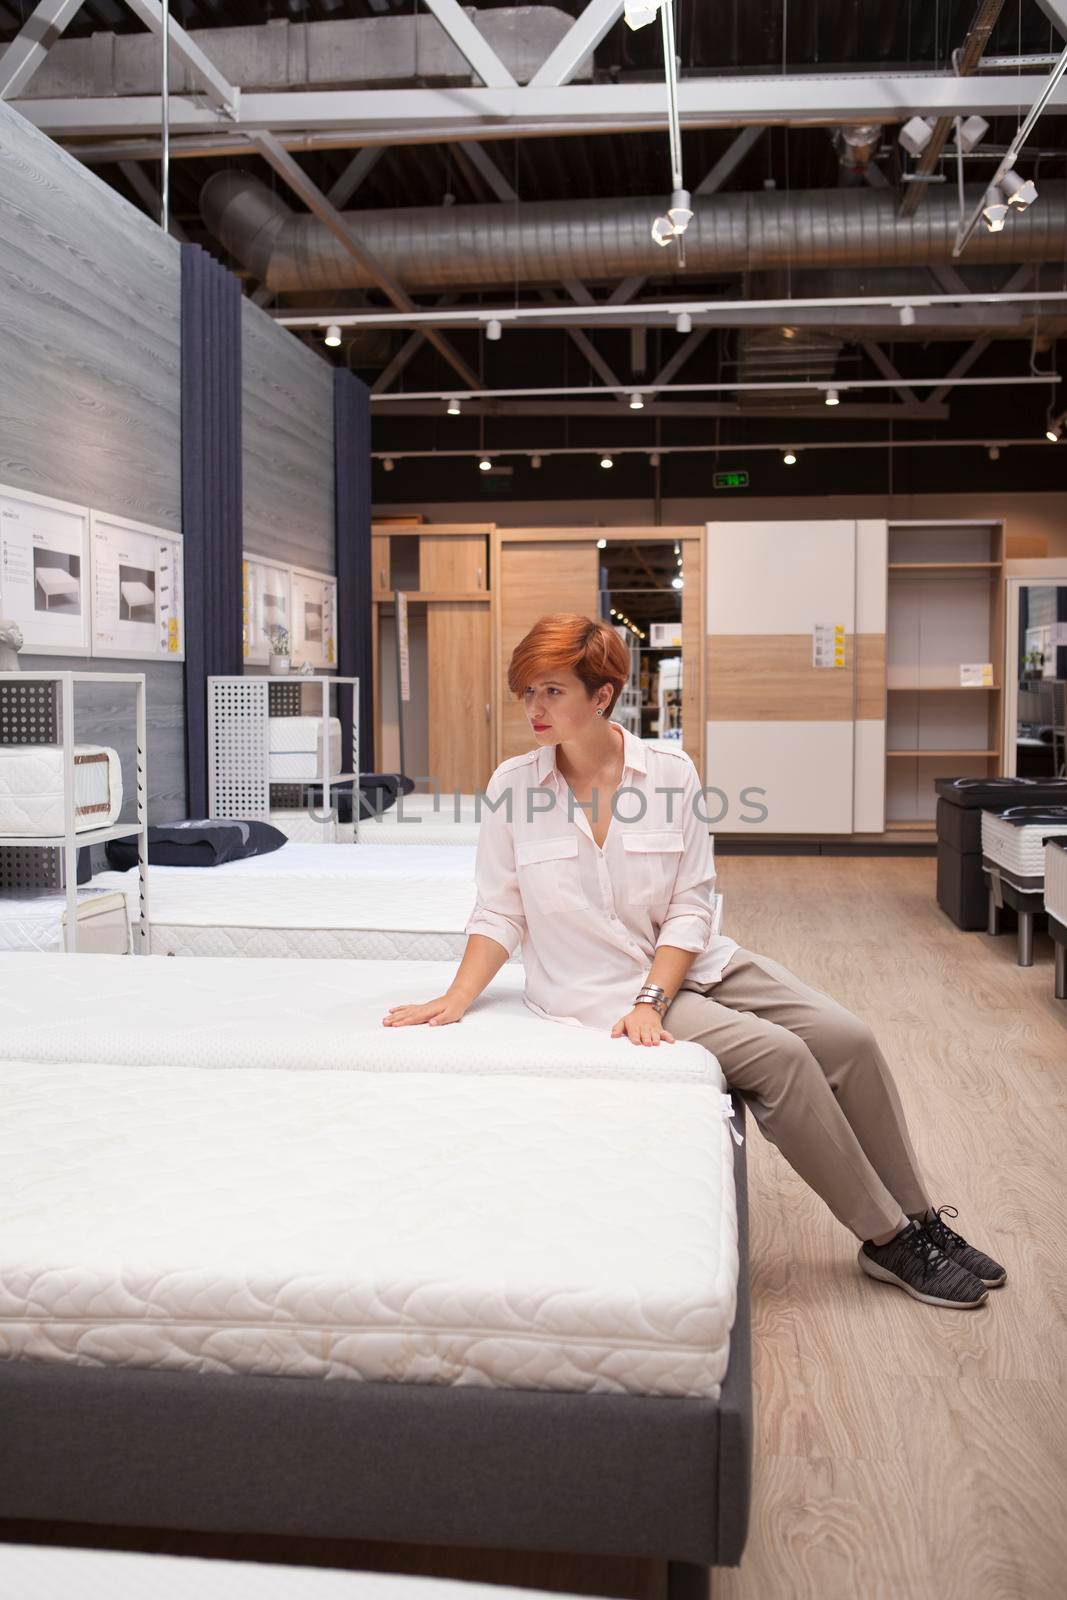 Vertical full length shot of a young woman trying new orthopedic bed at furniture store